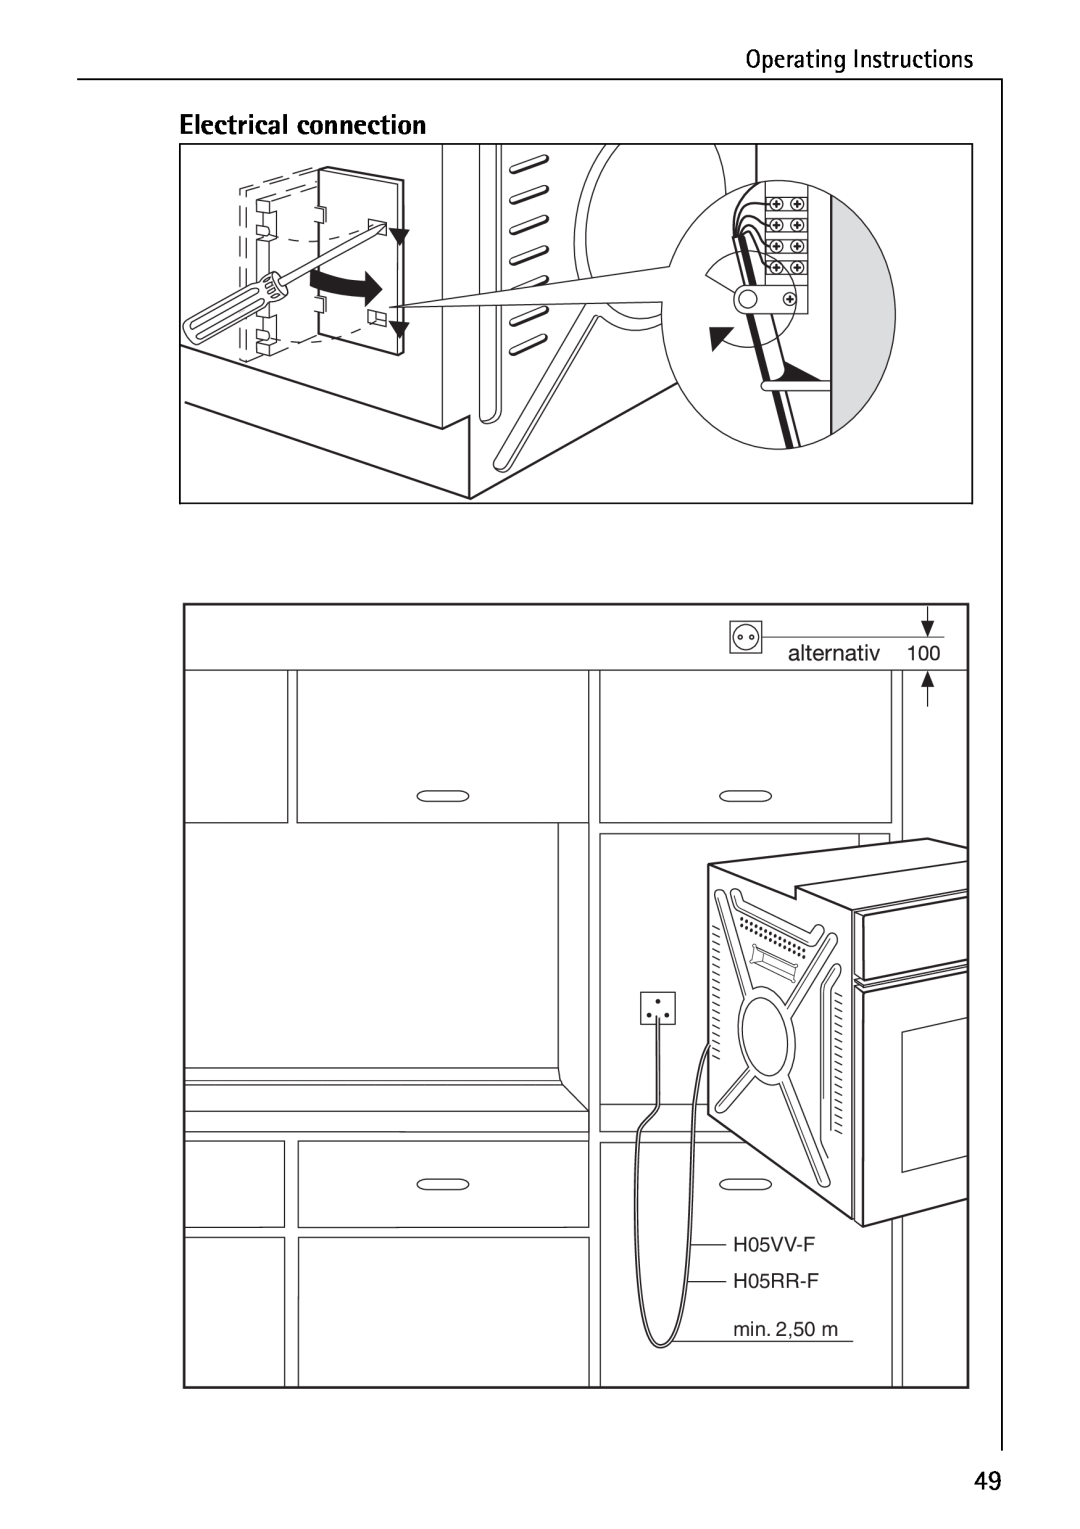 AEG B 4130 manual Electrical connection, Operating Instructions 